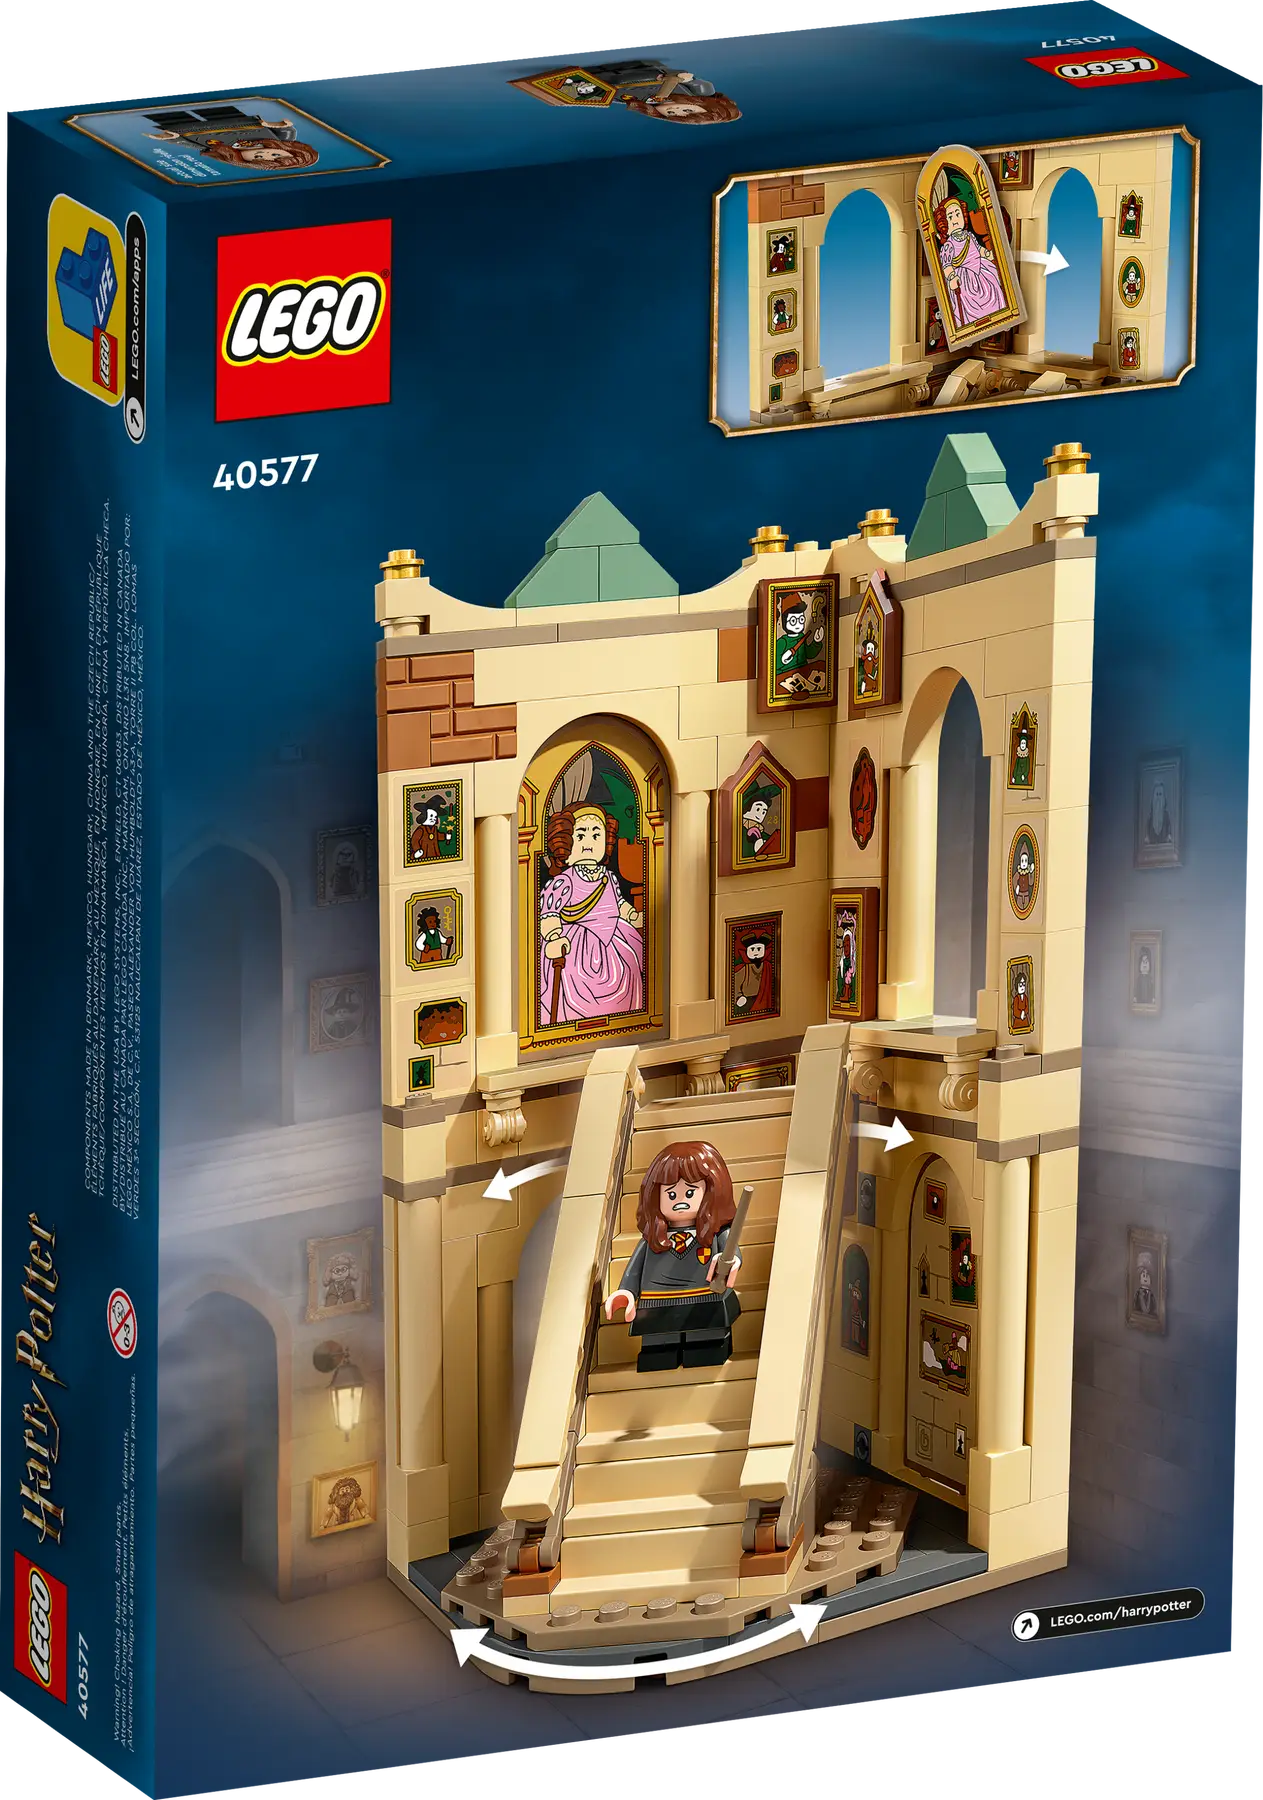 Lego Harry Potter™ Hogwarts Grand Staircase 40577